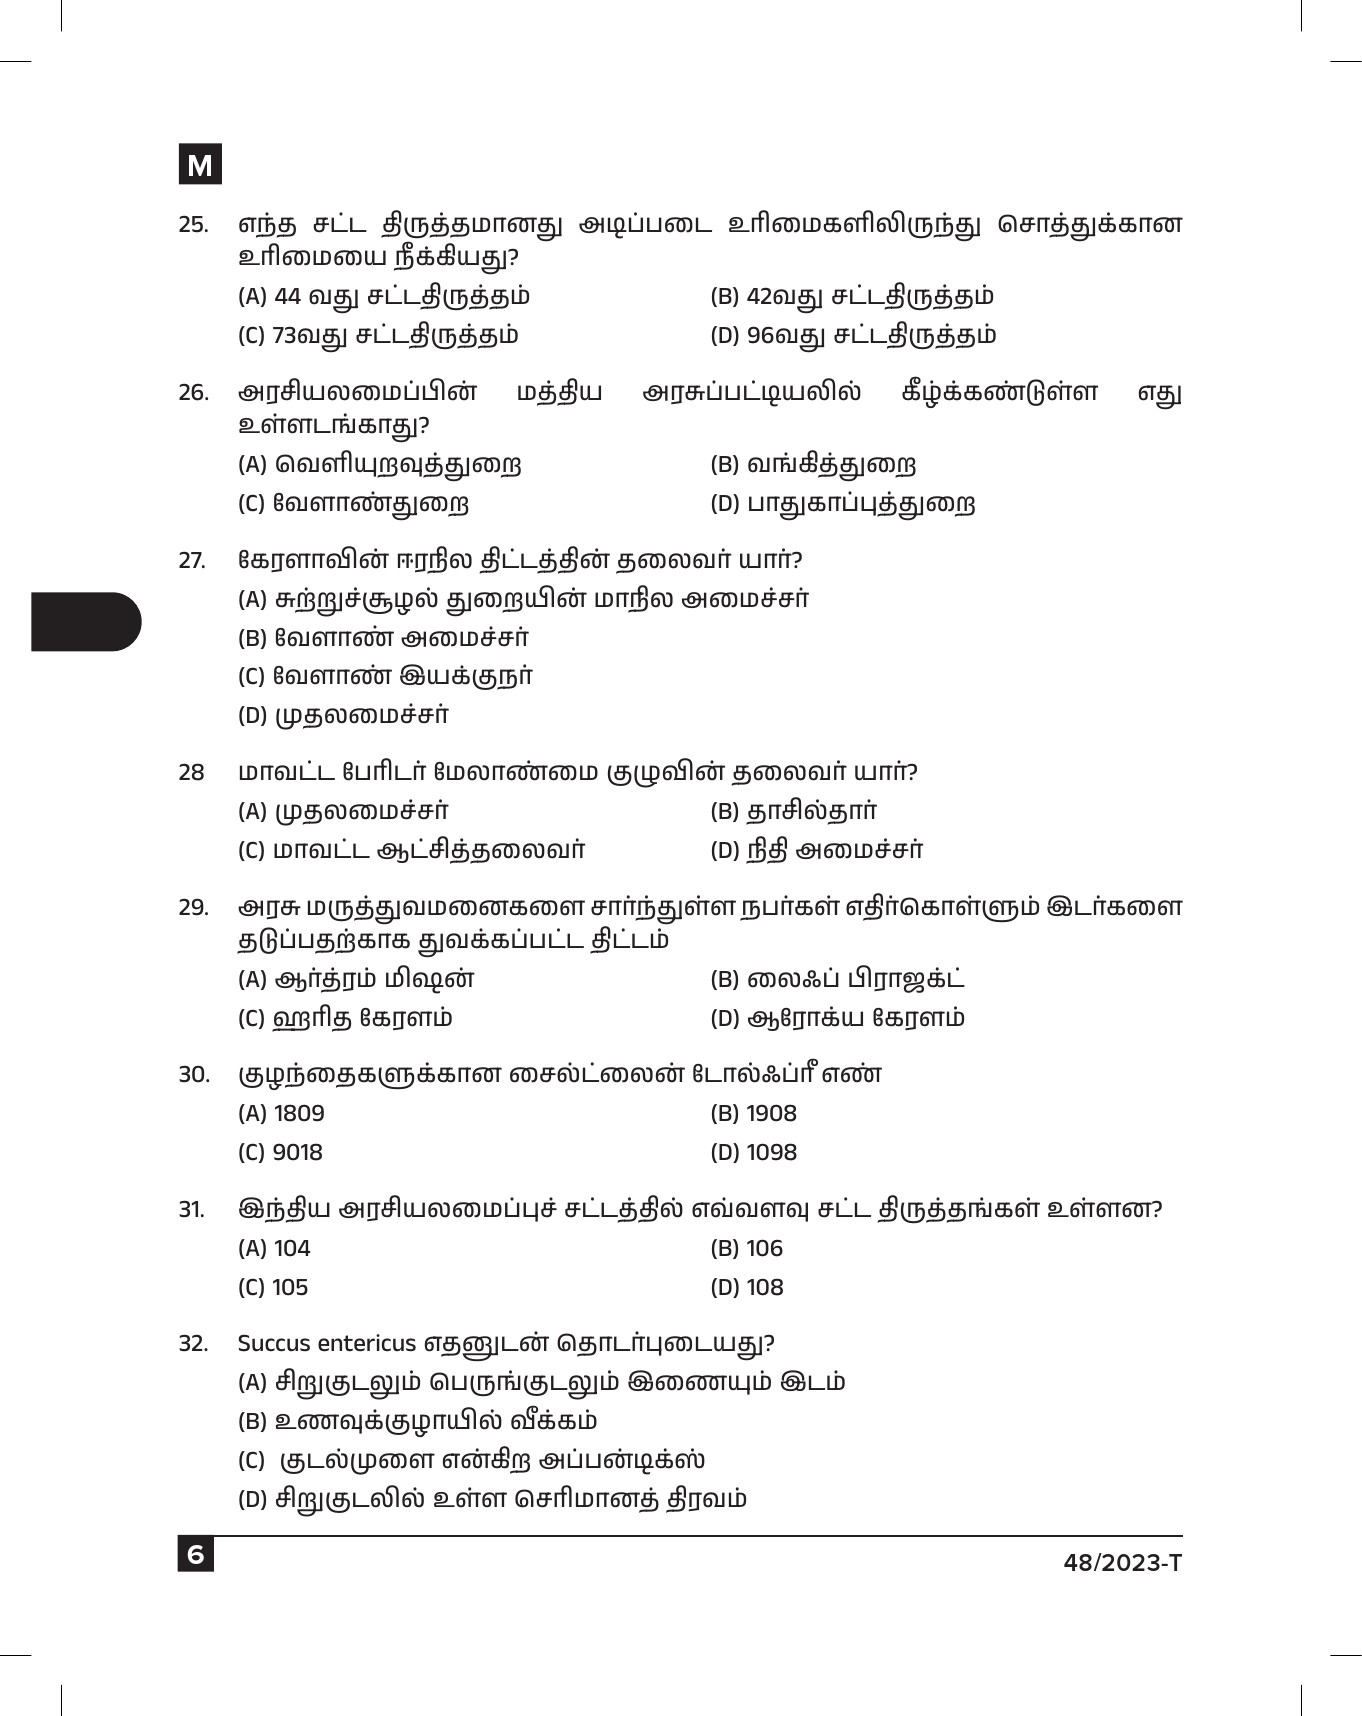 KPSC Fire and Rescue Officer Tamil Exam 2023 Code 0482023 T 5